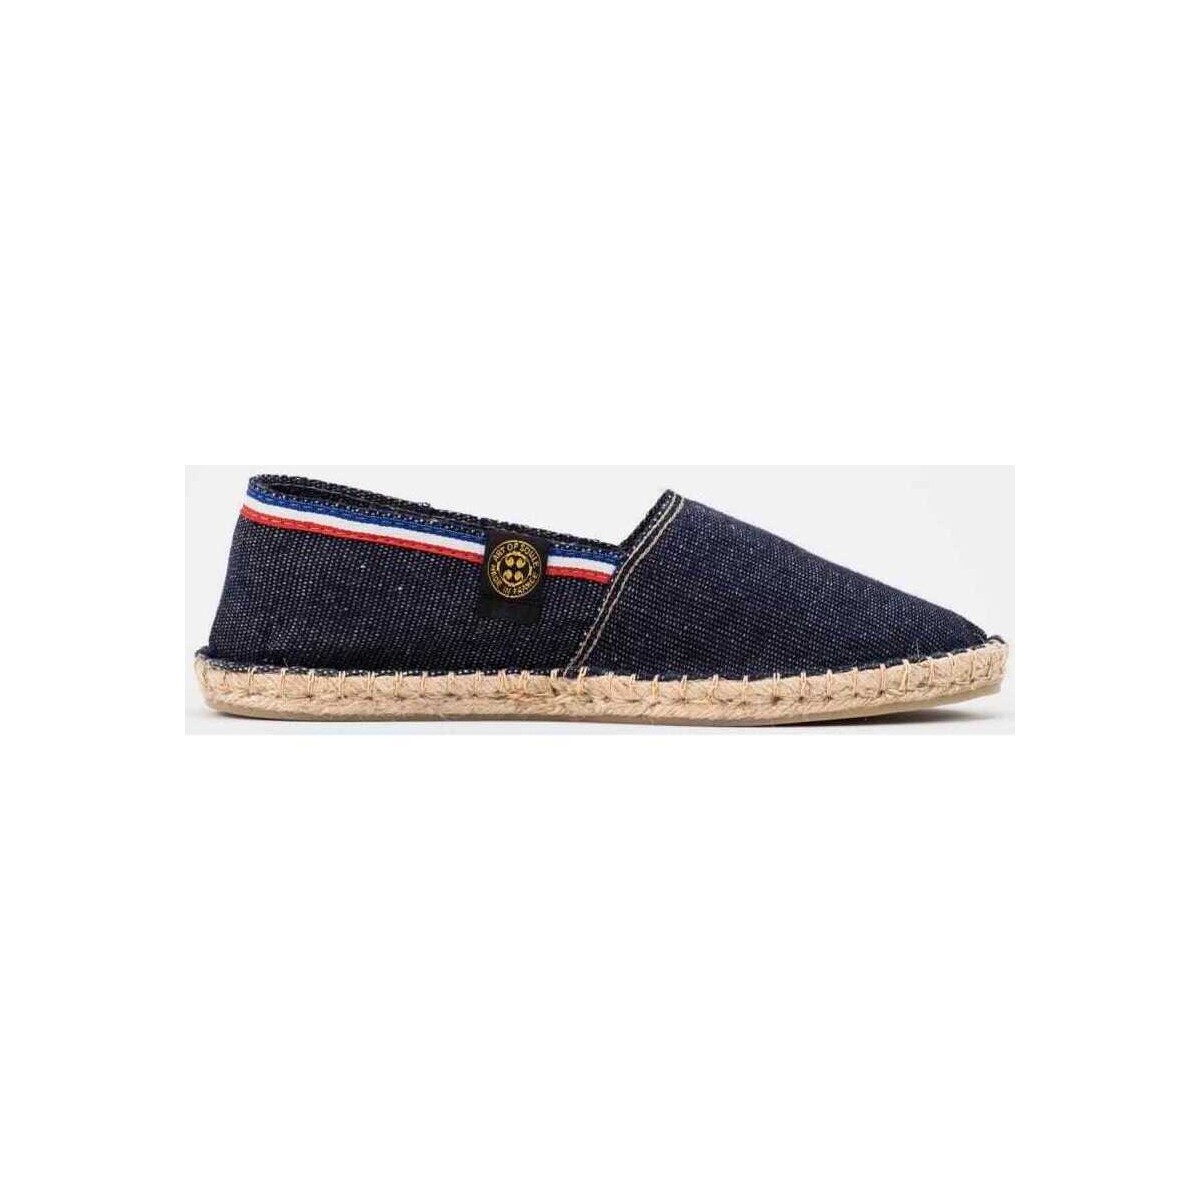 Chaussures Espadrilles Art of Soule So French Bleu